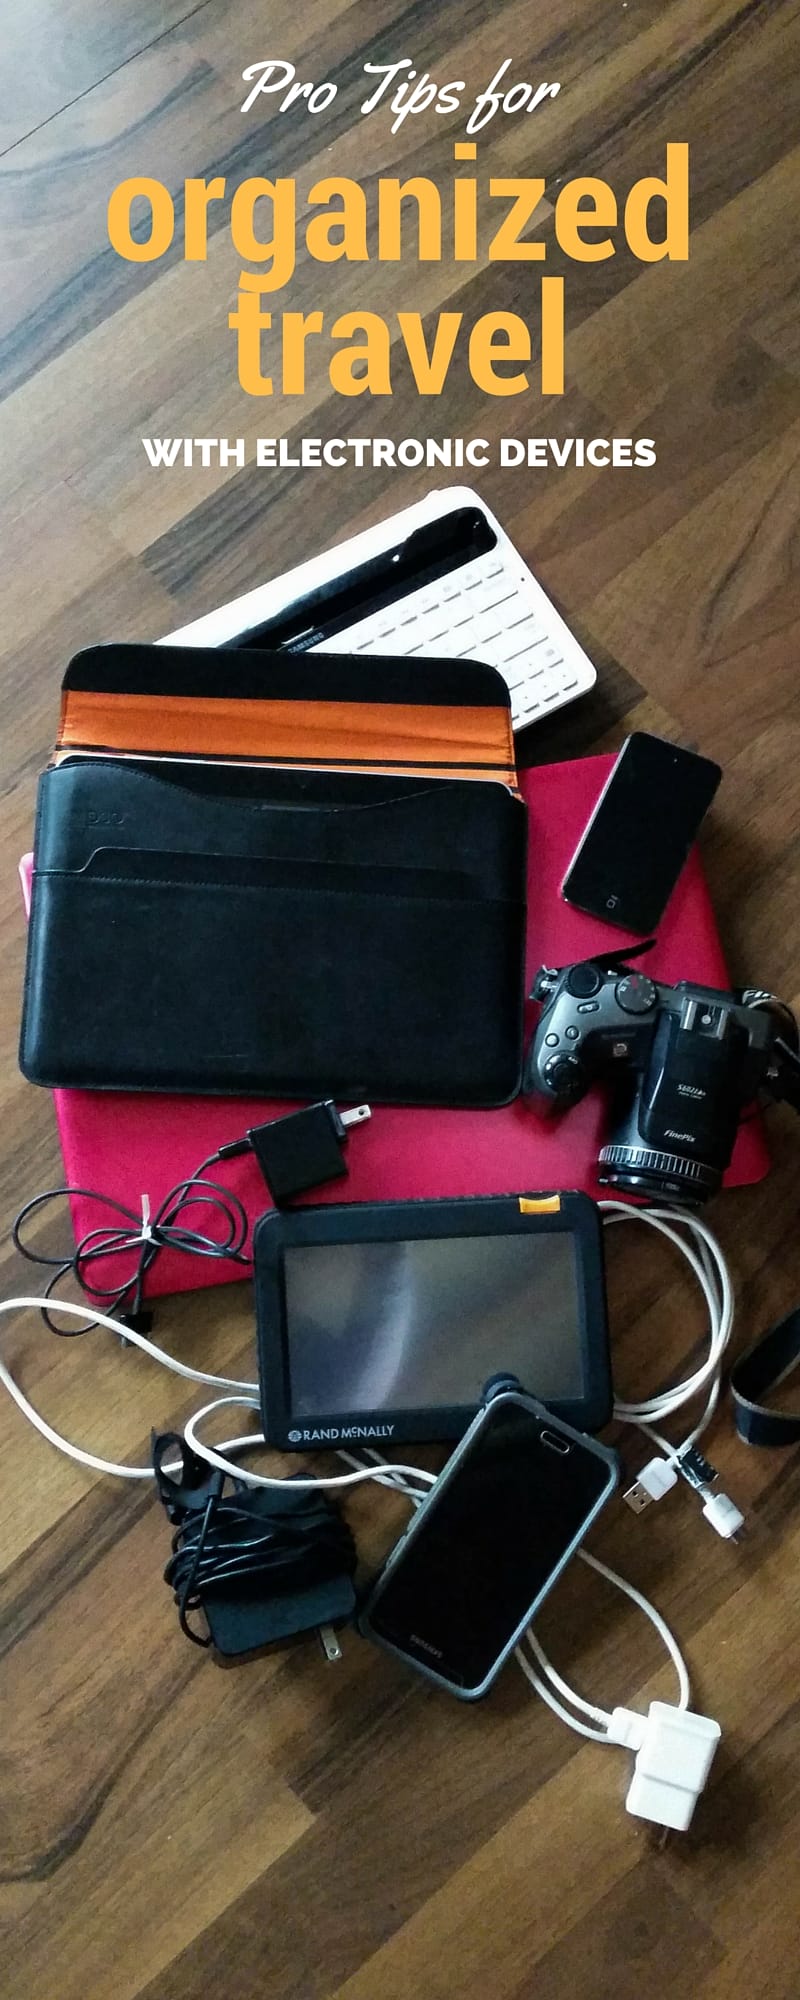 Pro Tips for Organized Travel with Electronic Devices at I'm an Organizing Junkie blog